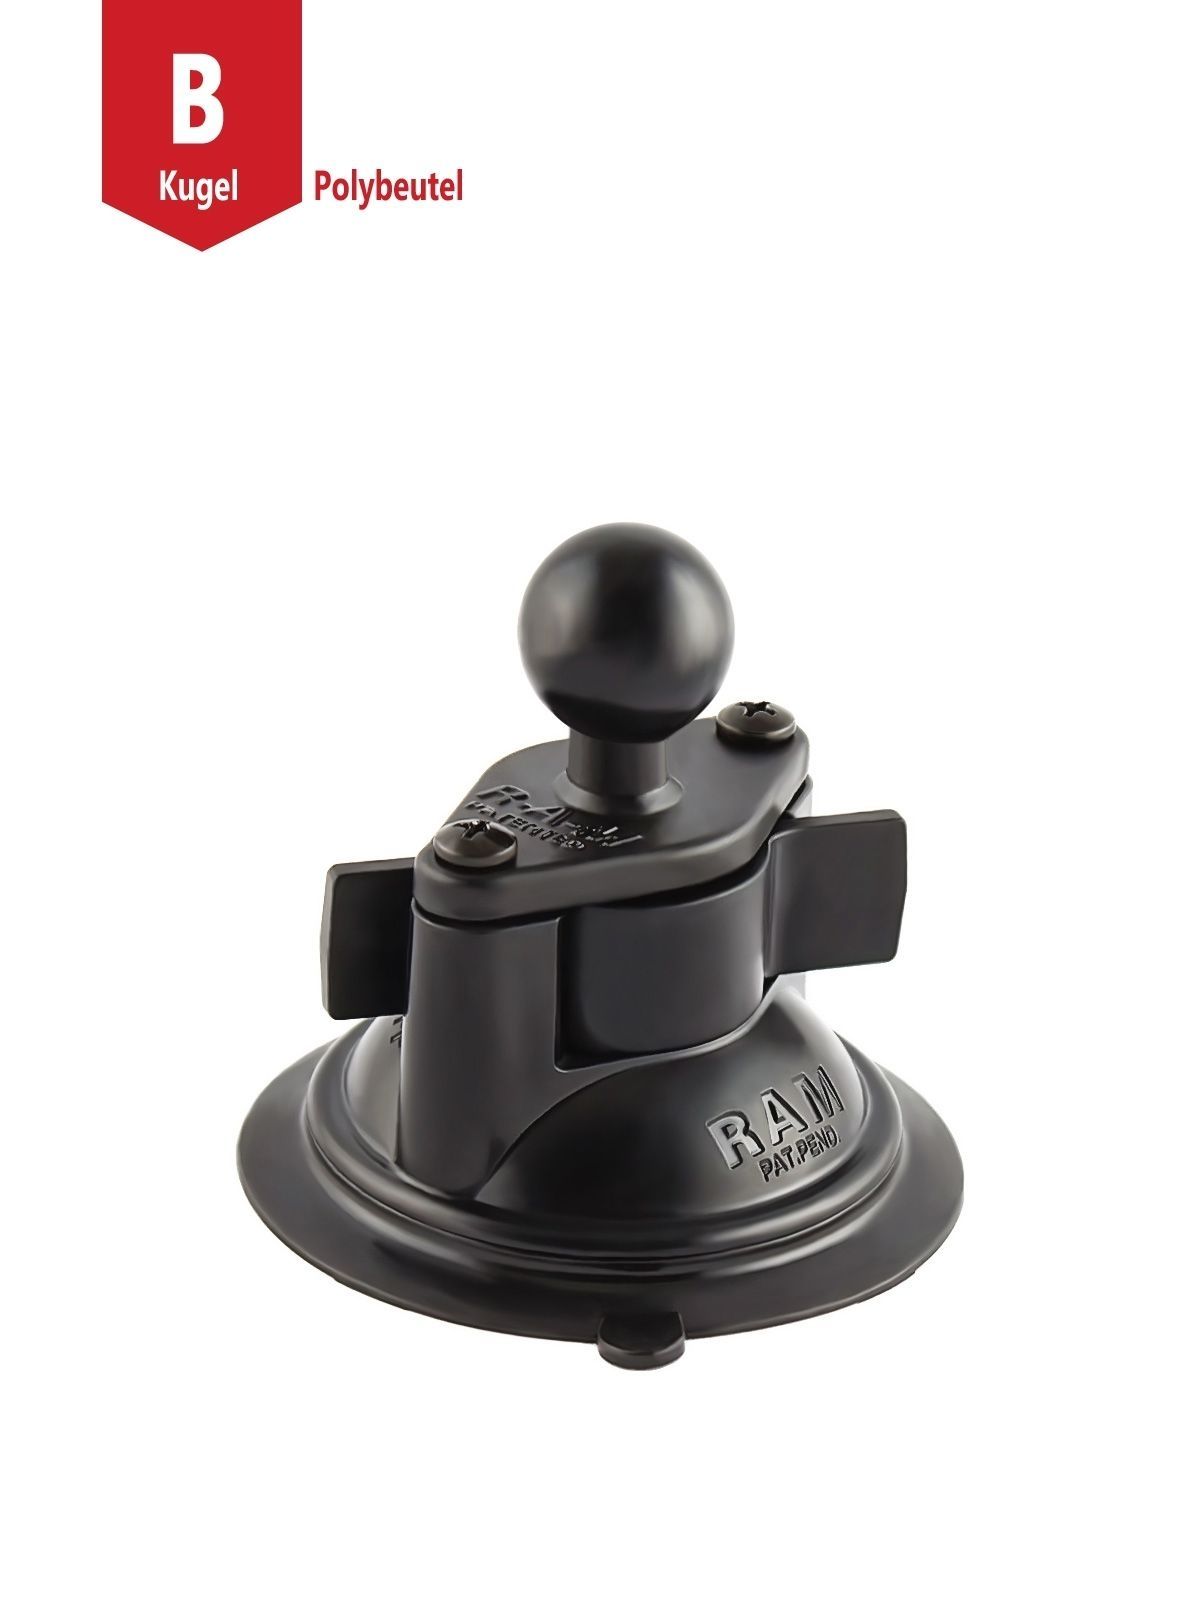 RAM MOUNTS Suction Cup incl. Diamond Base Plate with 1" B-Ball